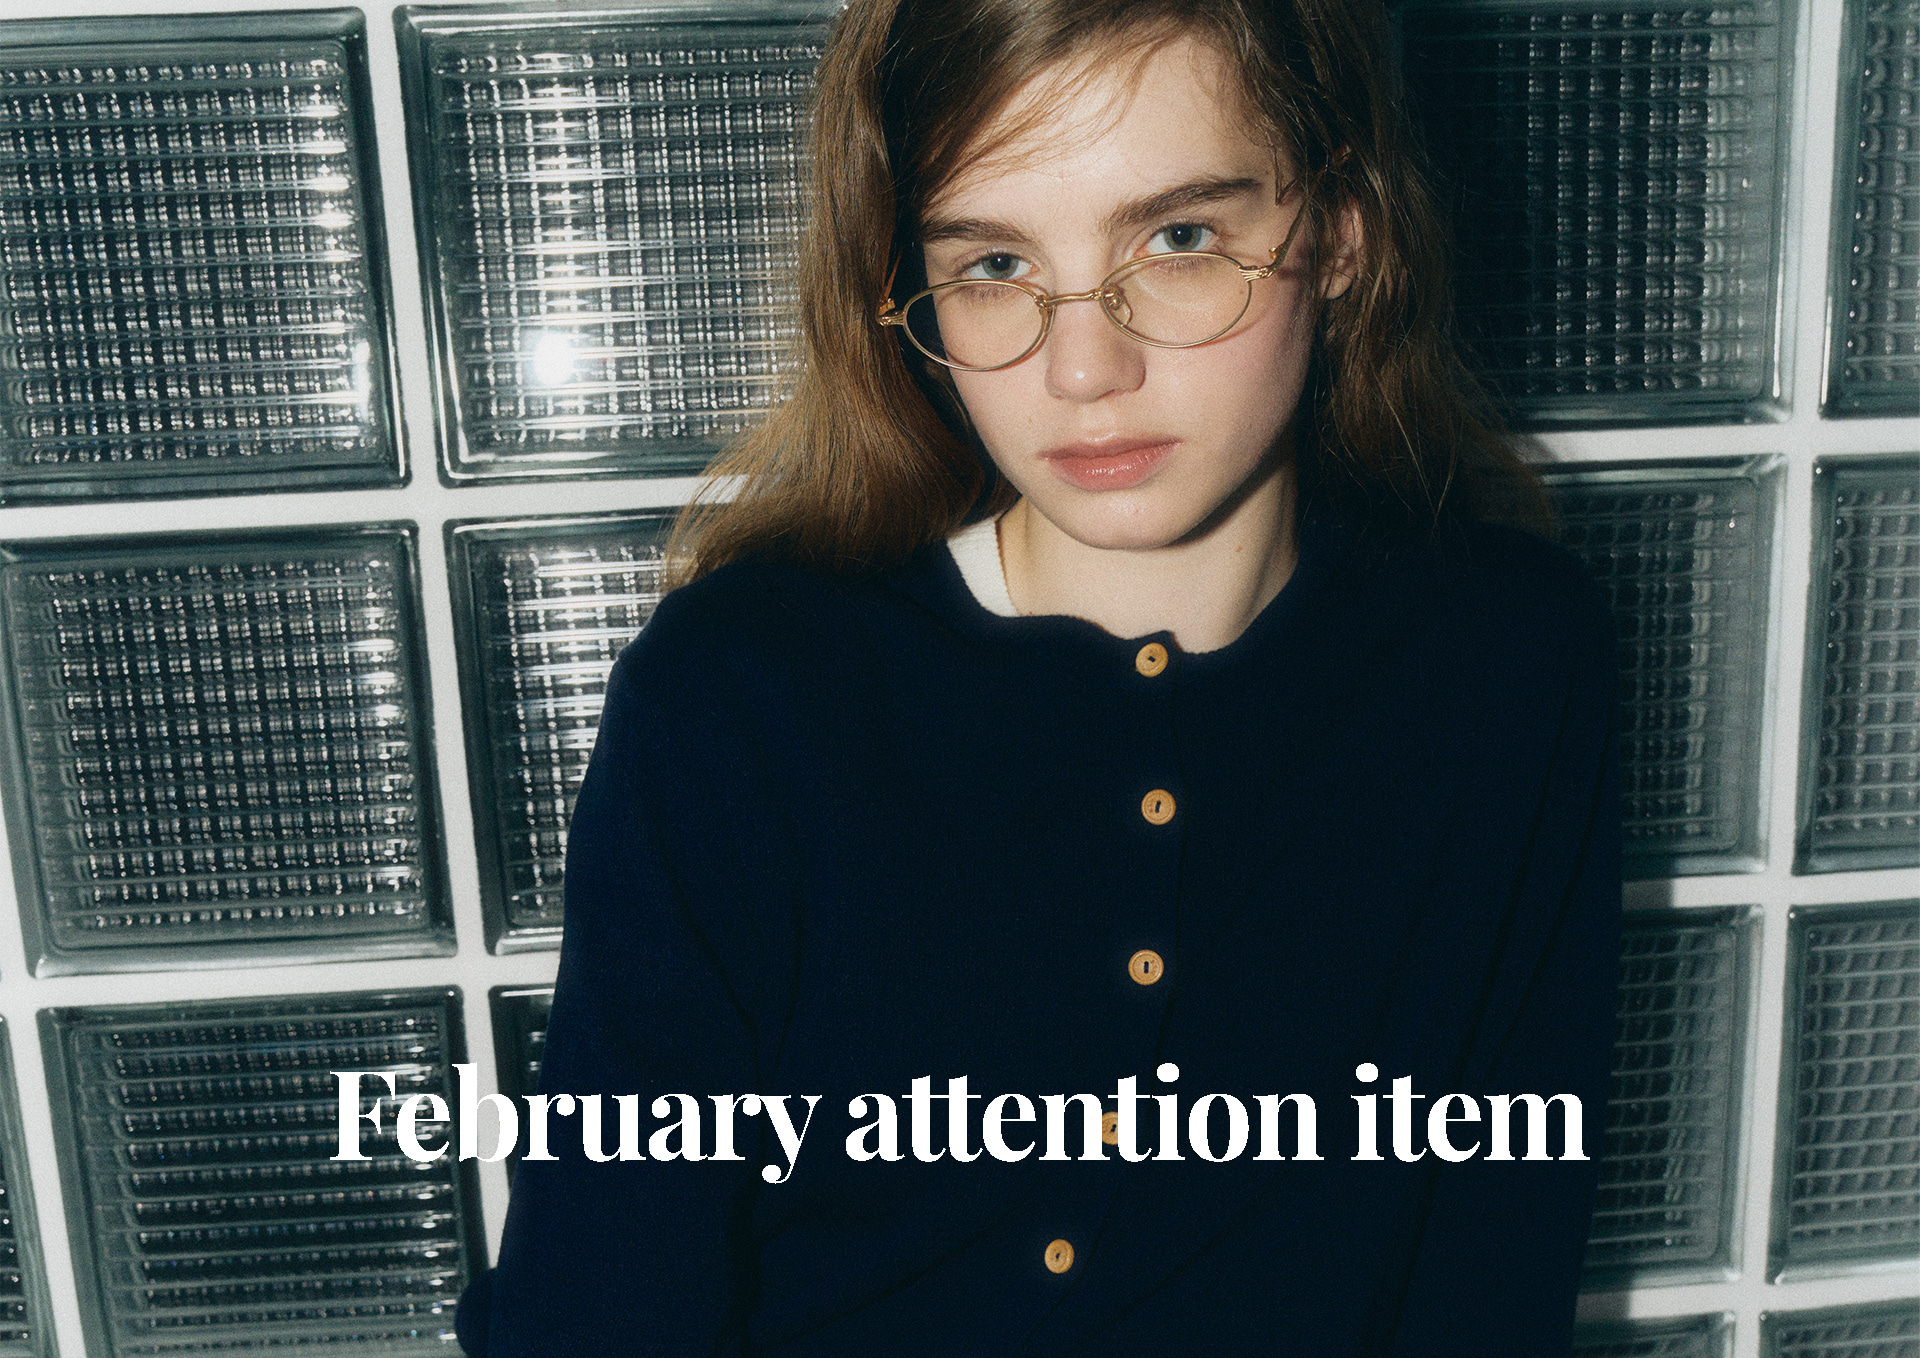 February attention item